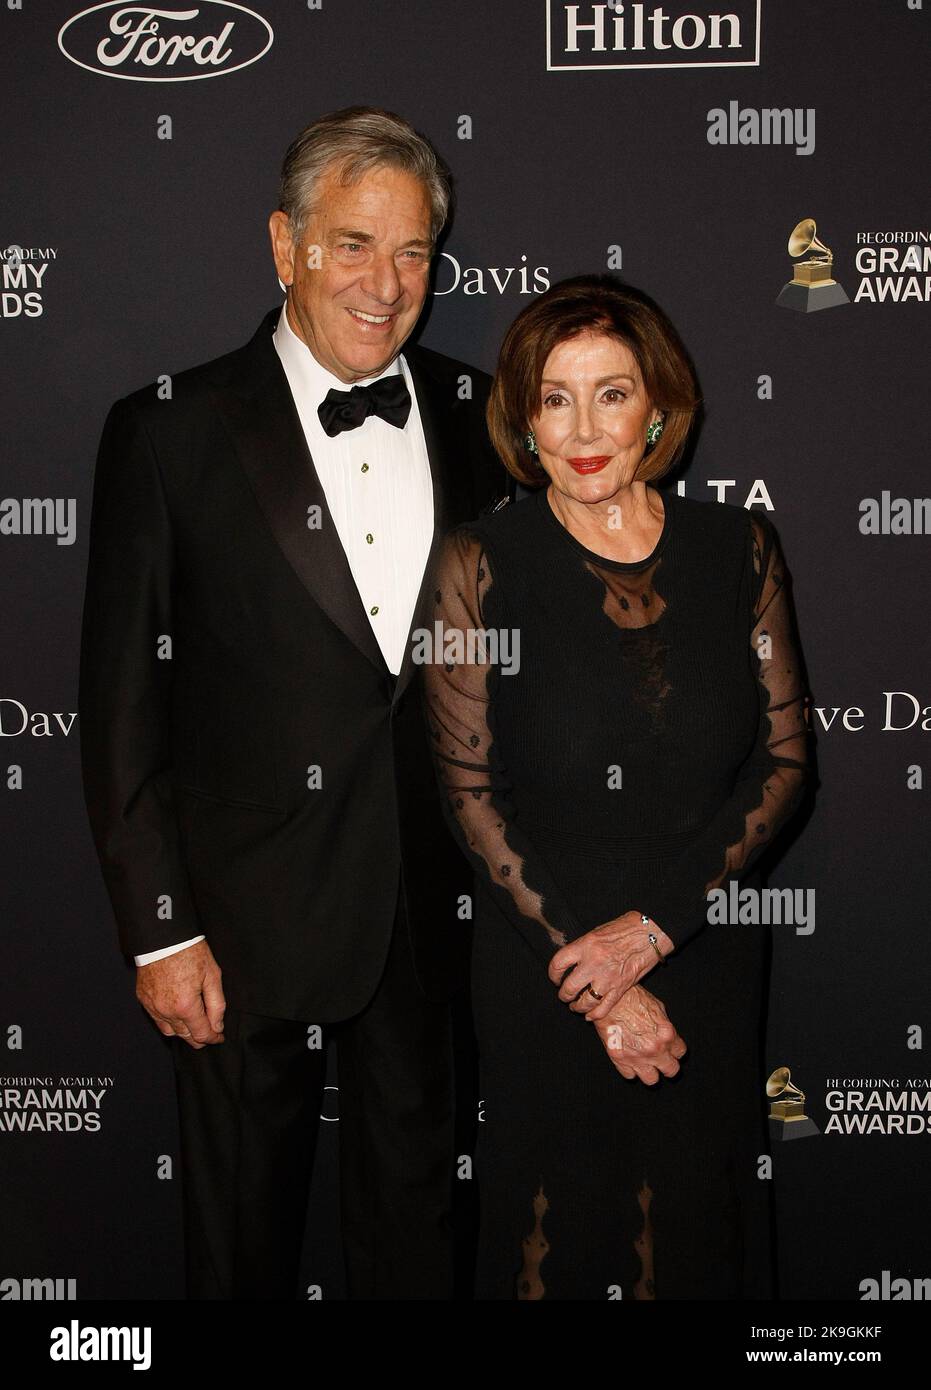 BEVERLY HILLS, CALIFORNIA - JANUARY 25: Paul Pelosi, Nancy Pelosi attend the Pre-GRAMMY Gala and GRAMMY Salute to Industry Icons at The Beverly Hilton Hotel on January 25, 2020 in Beverly Hills, California. Photo: CraSH/imageSPACE/MediaPunch Stock Photo